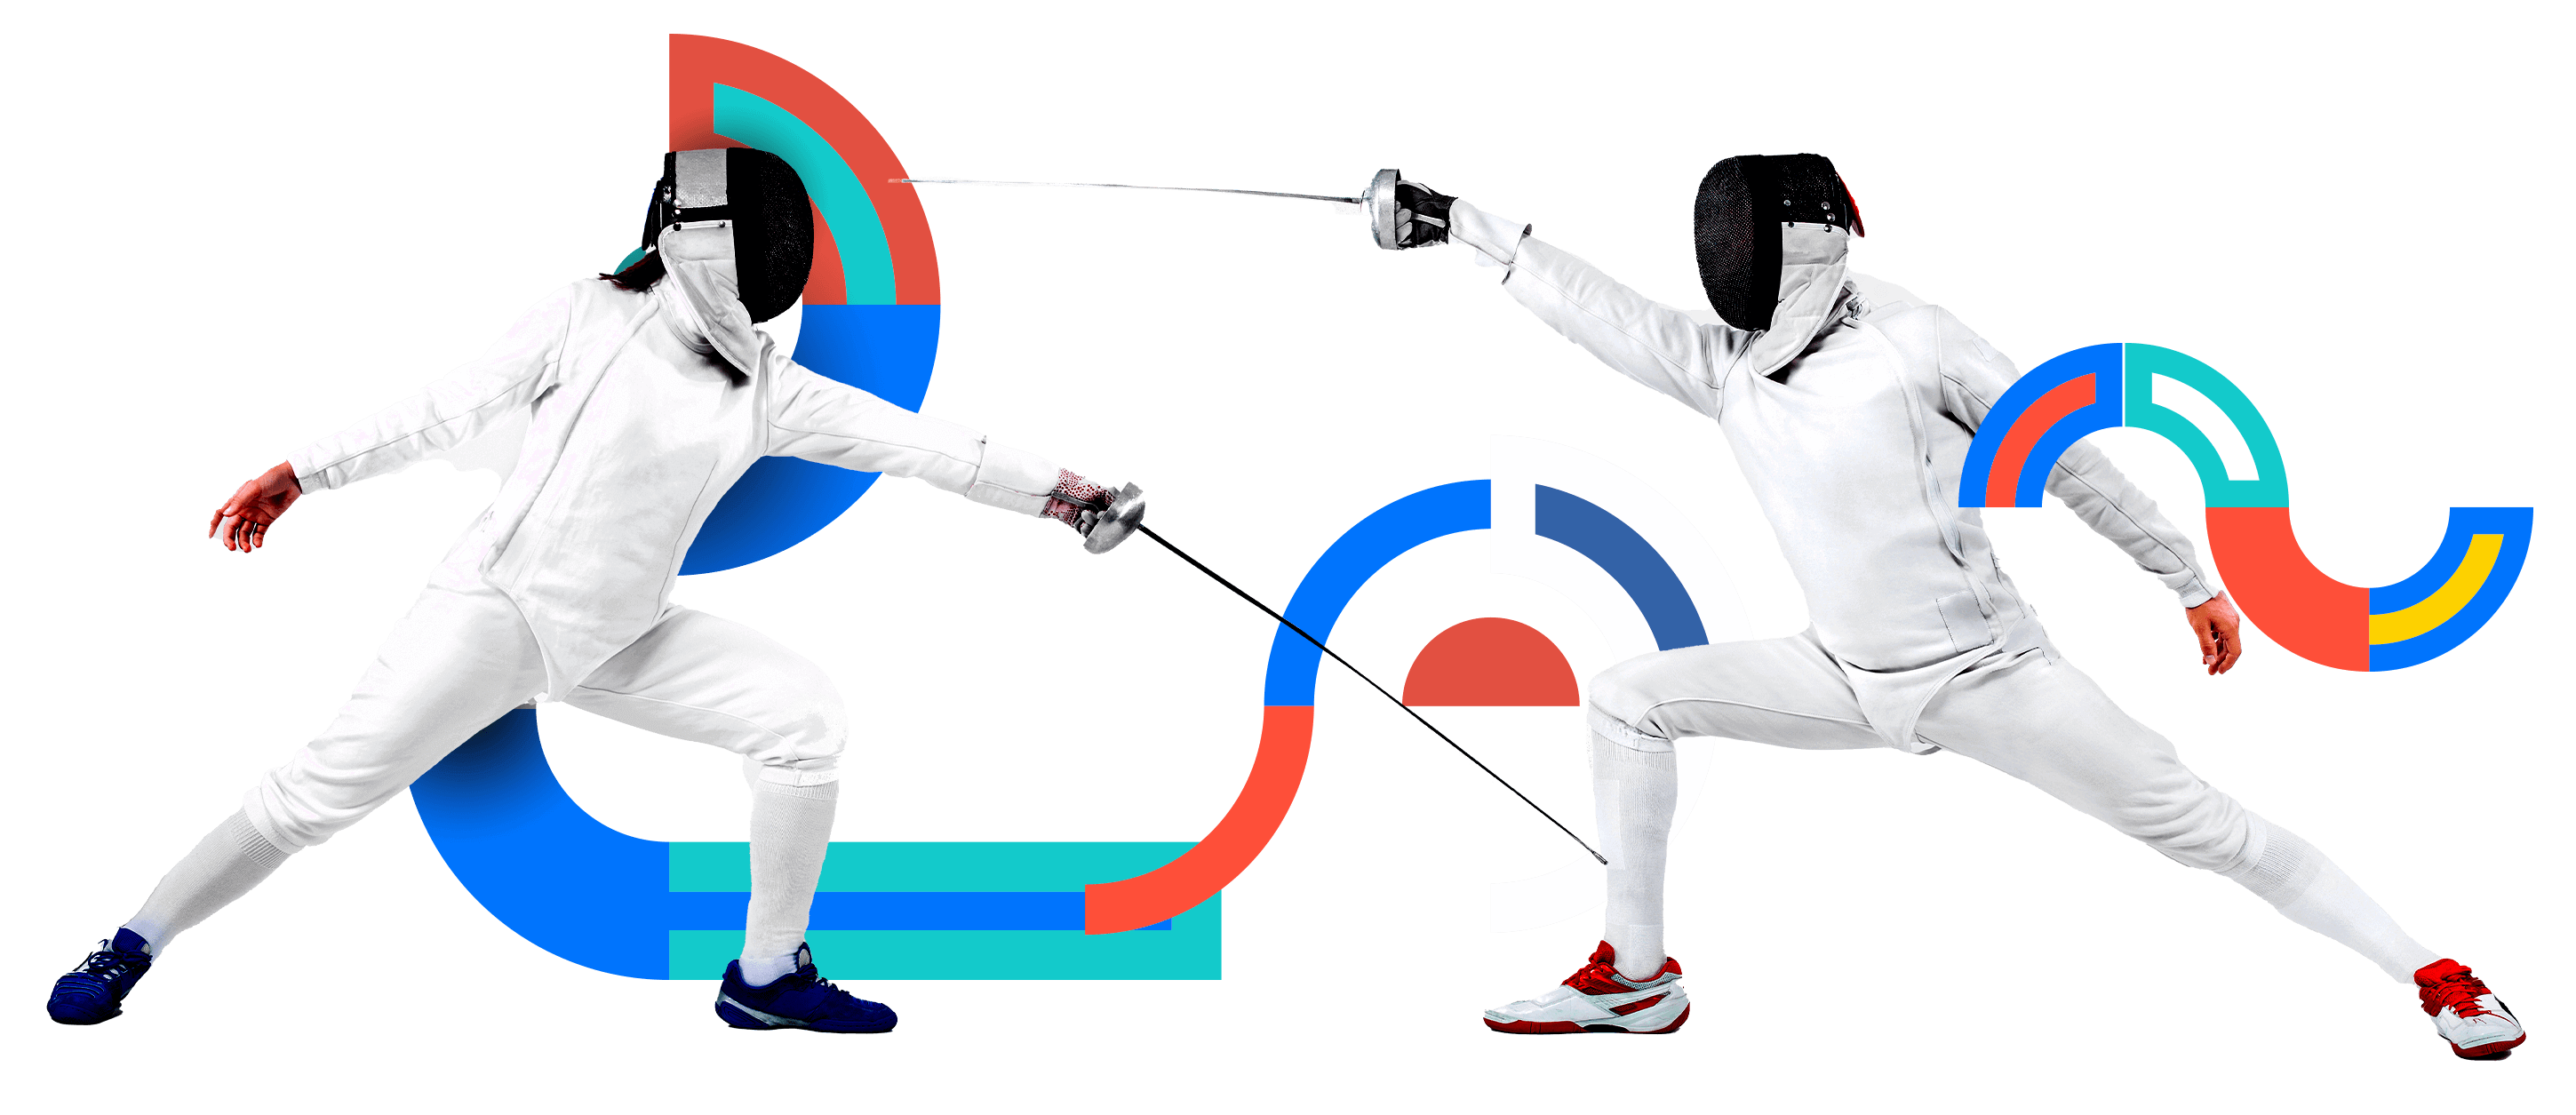 In the picture, two fencers are competing against each other. One is attacking the legs of the opponent and the other the top parts of the body. Both are wearing masks, jackets, pants and gloves.